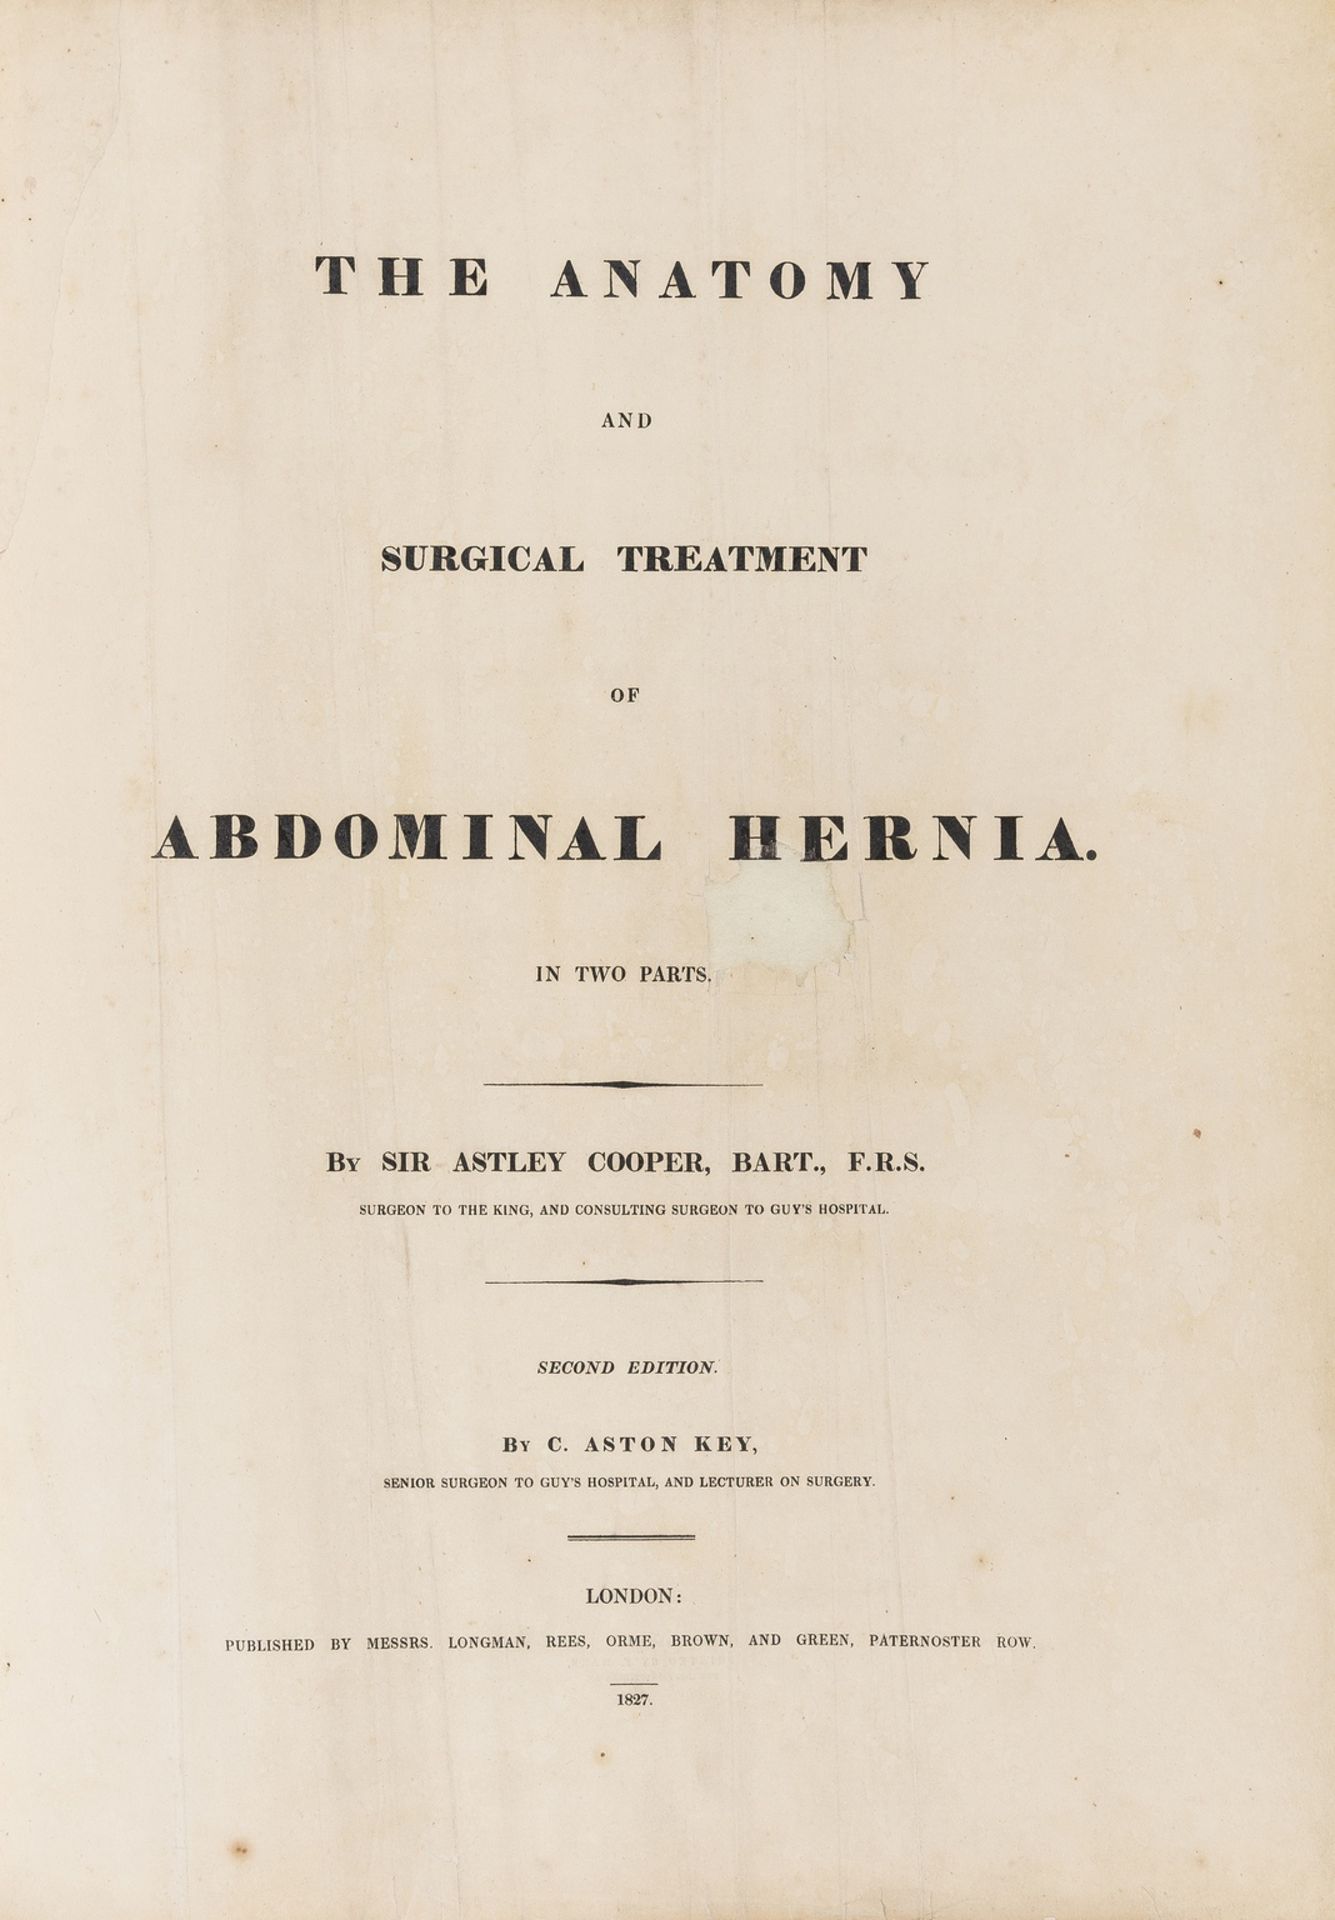 Cooper (Sir Astley) and C. Aston Key, The Anatomy and Surgical Treatment of Abdominal Hernia in …